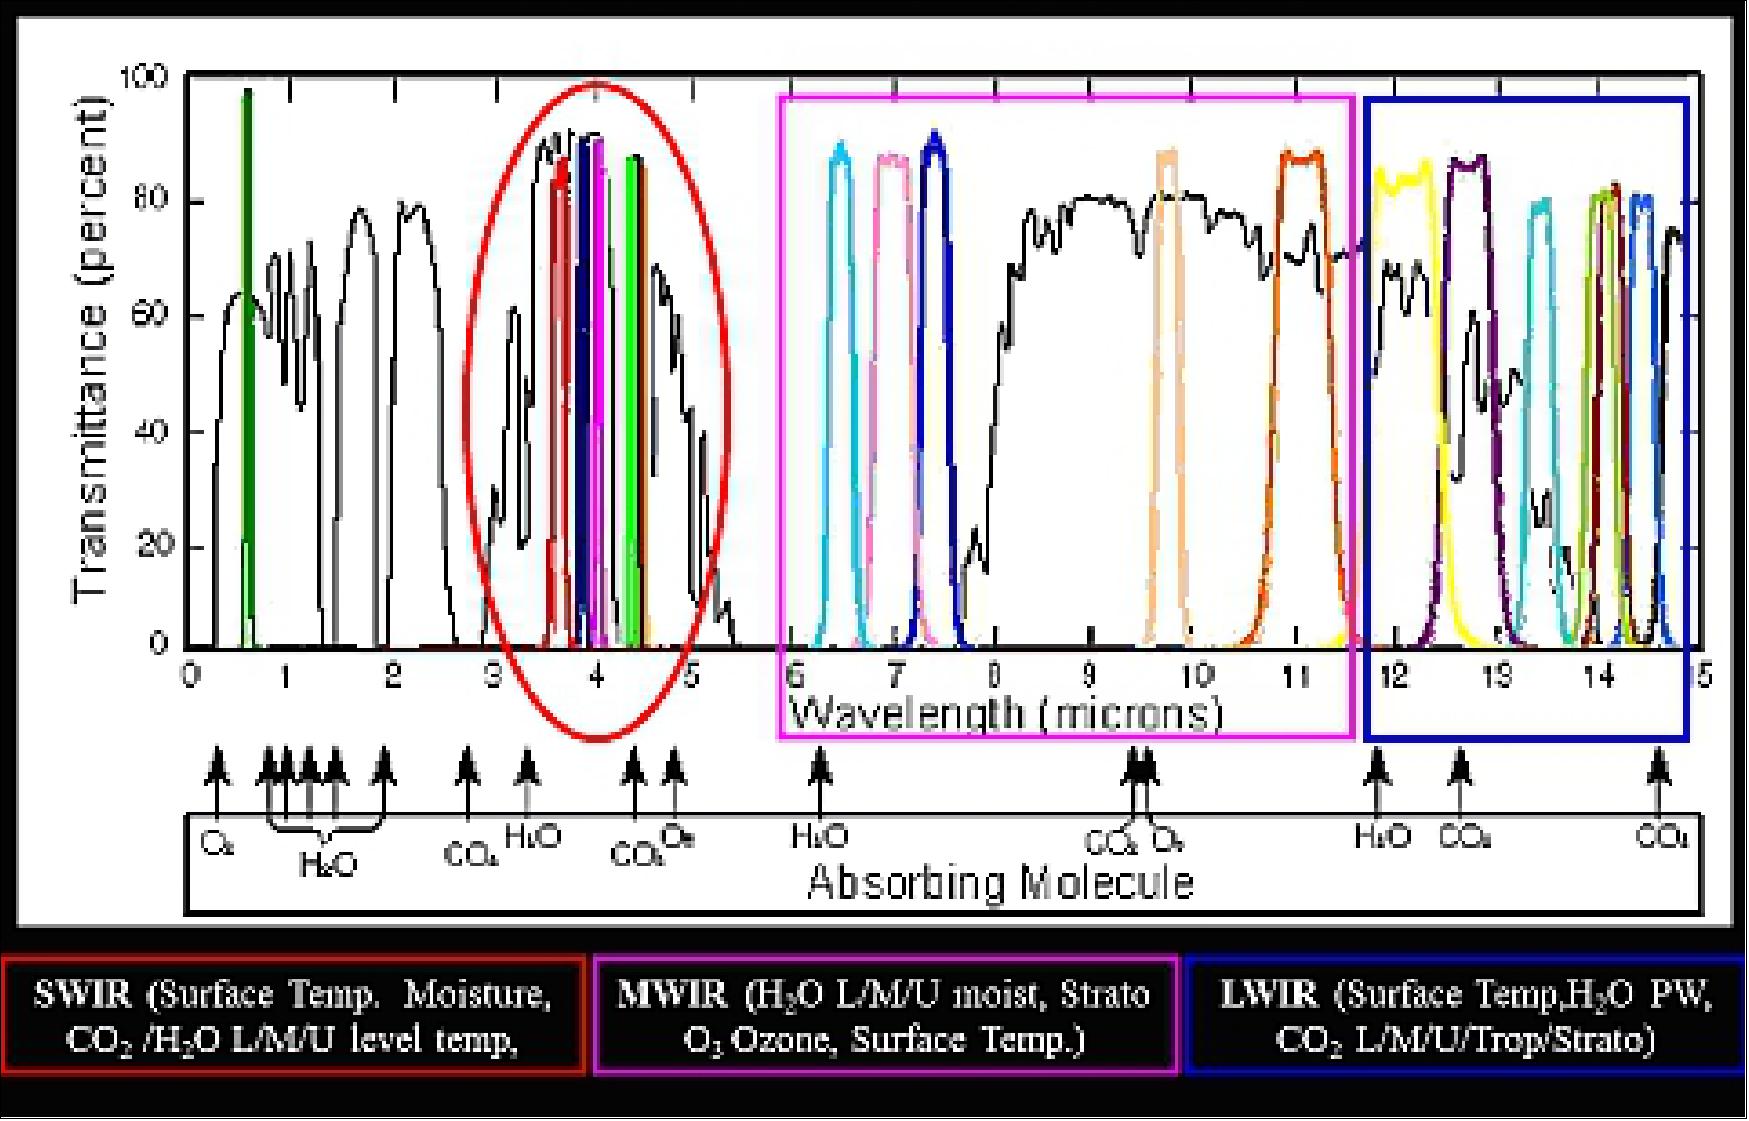 Figure 15: Sounder spectral bands and their applications (image credit: ISRO)